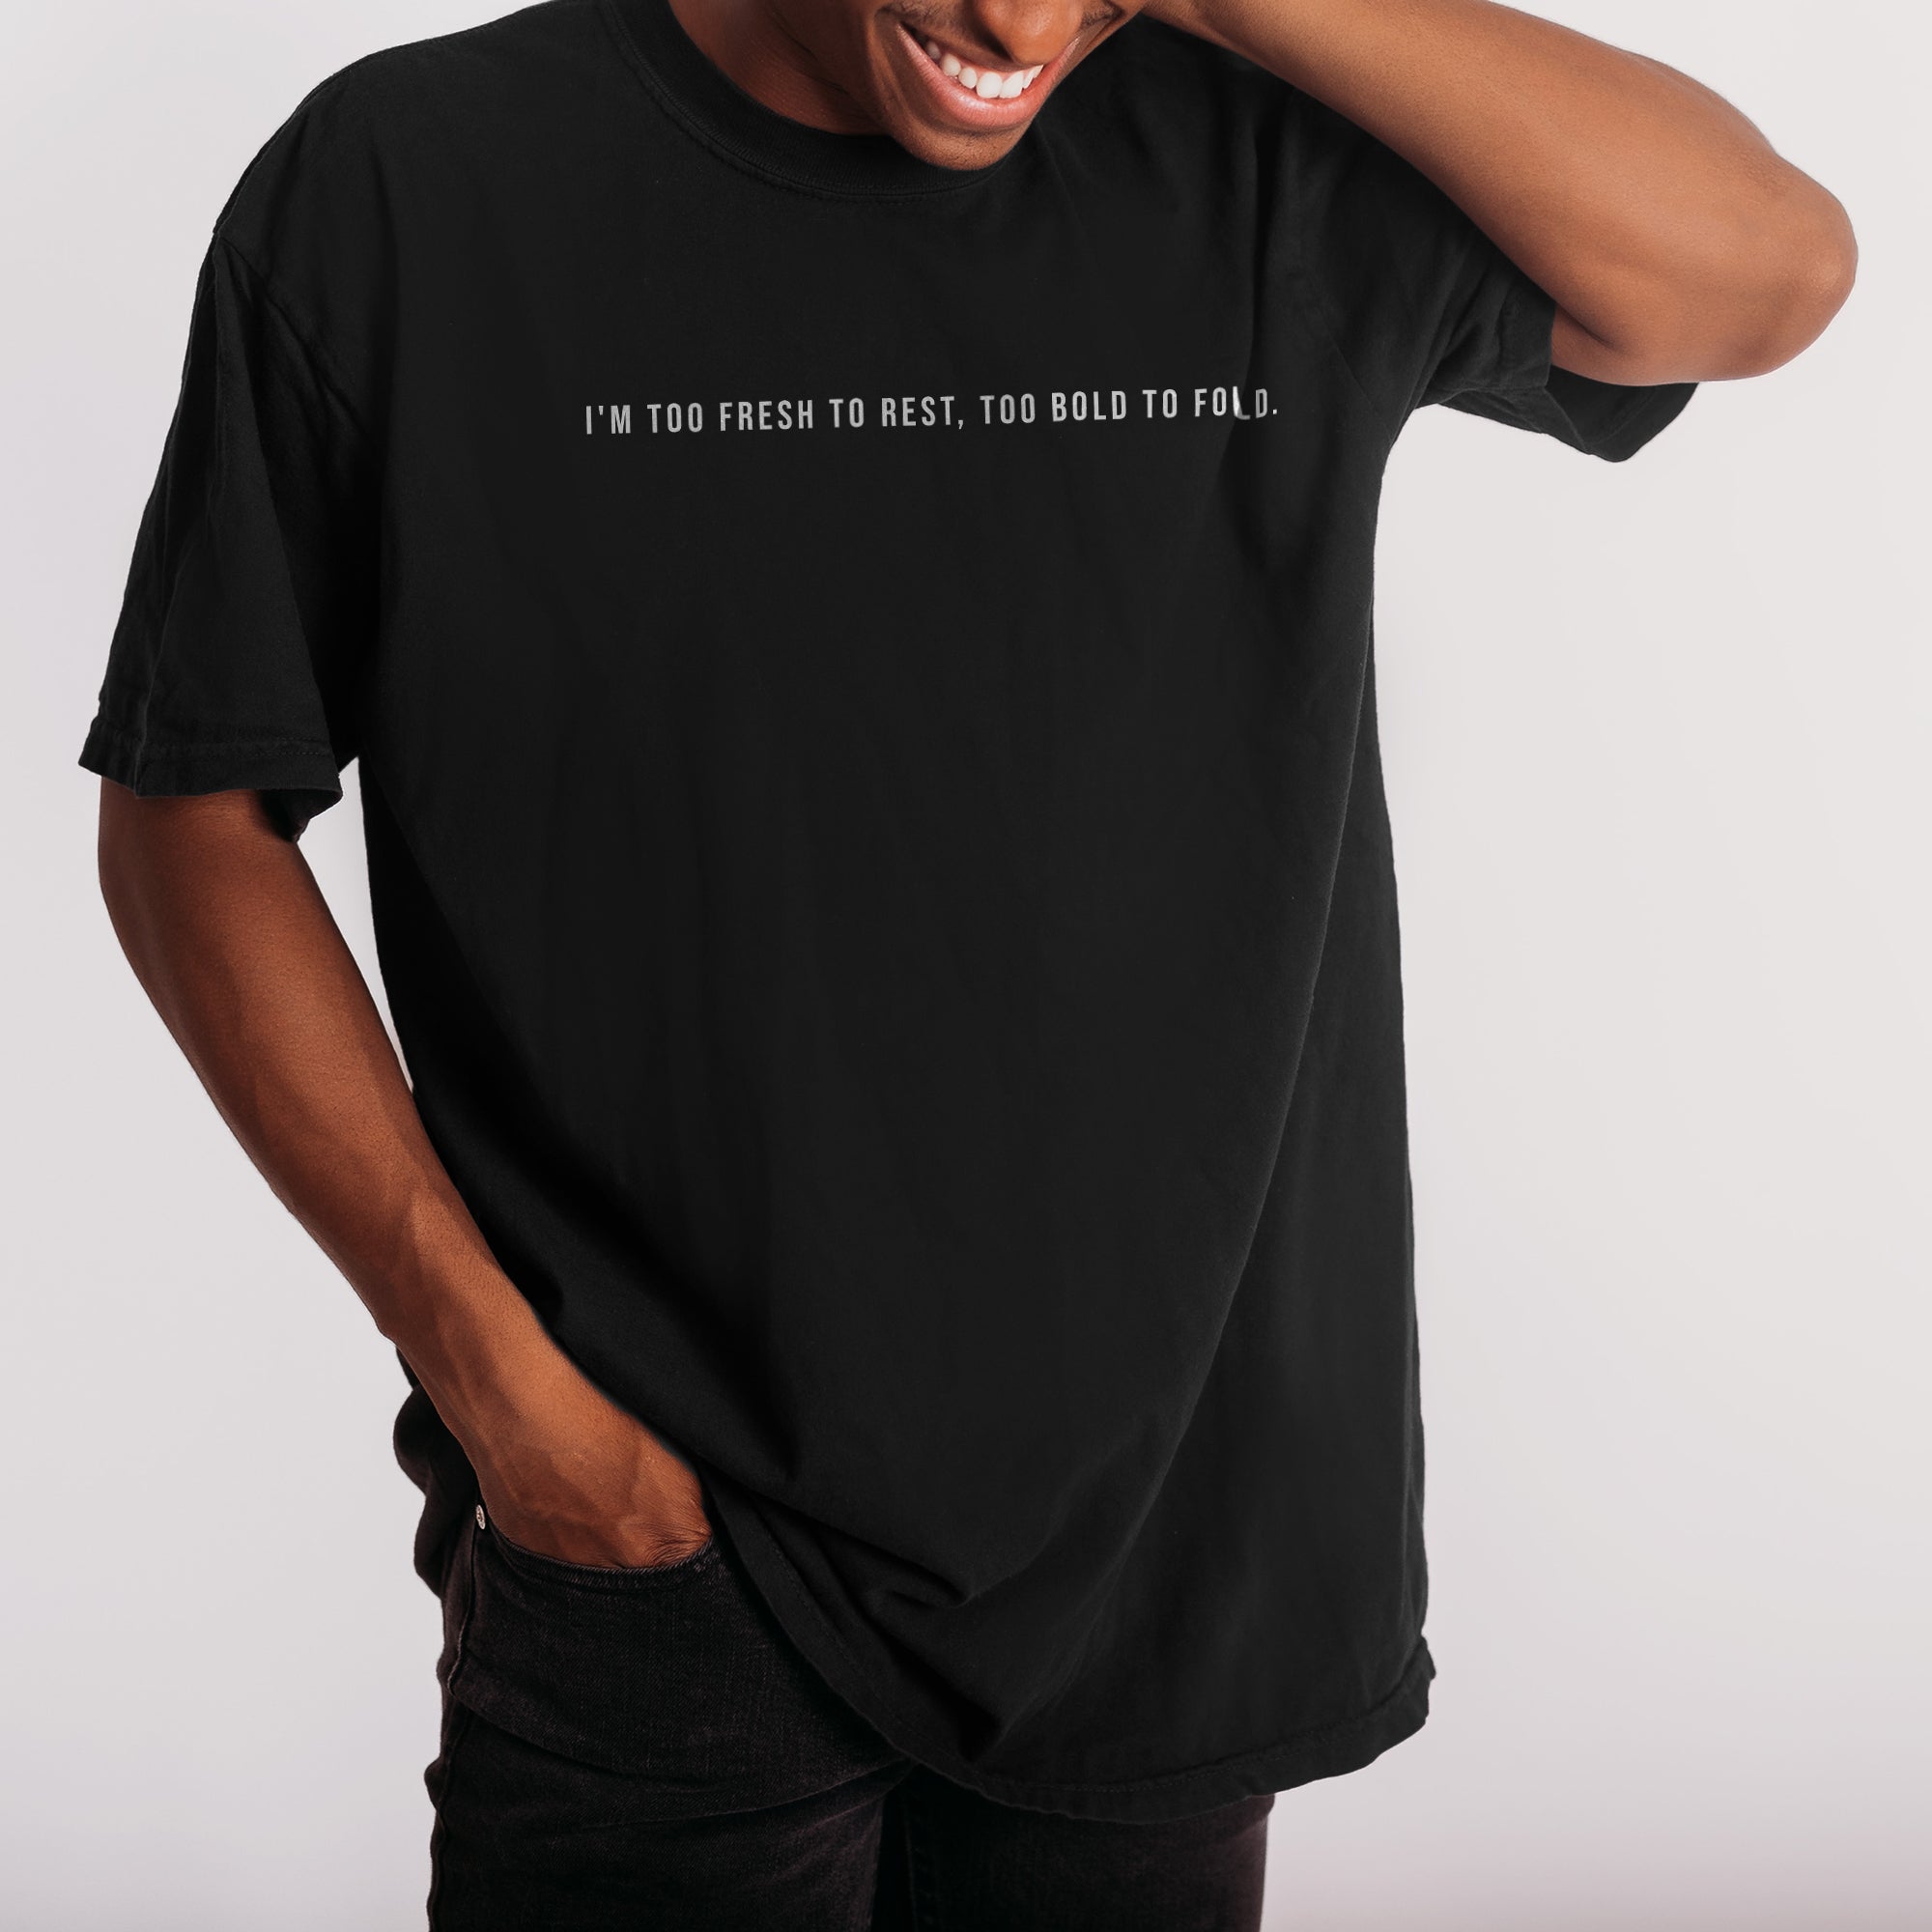 I'm Too Fresh to Rest, Too Bold to Fold Boyfriend Crew Tee Solid Black Closeup Artwork and Texture